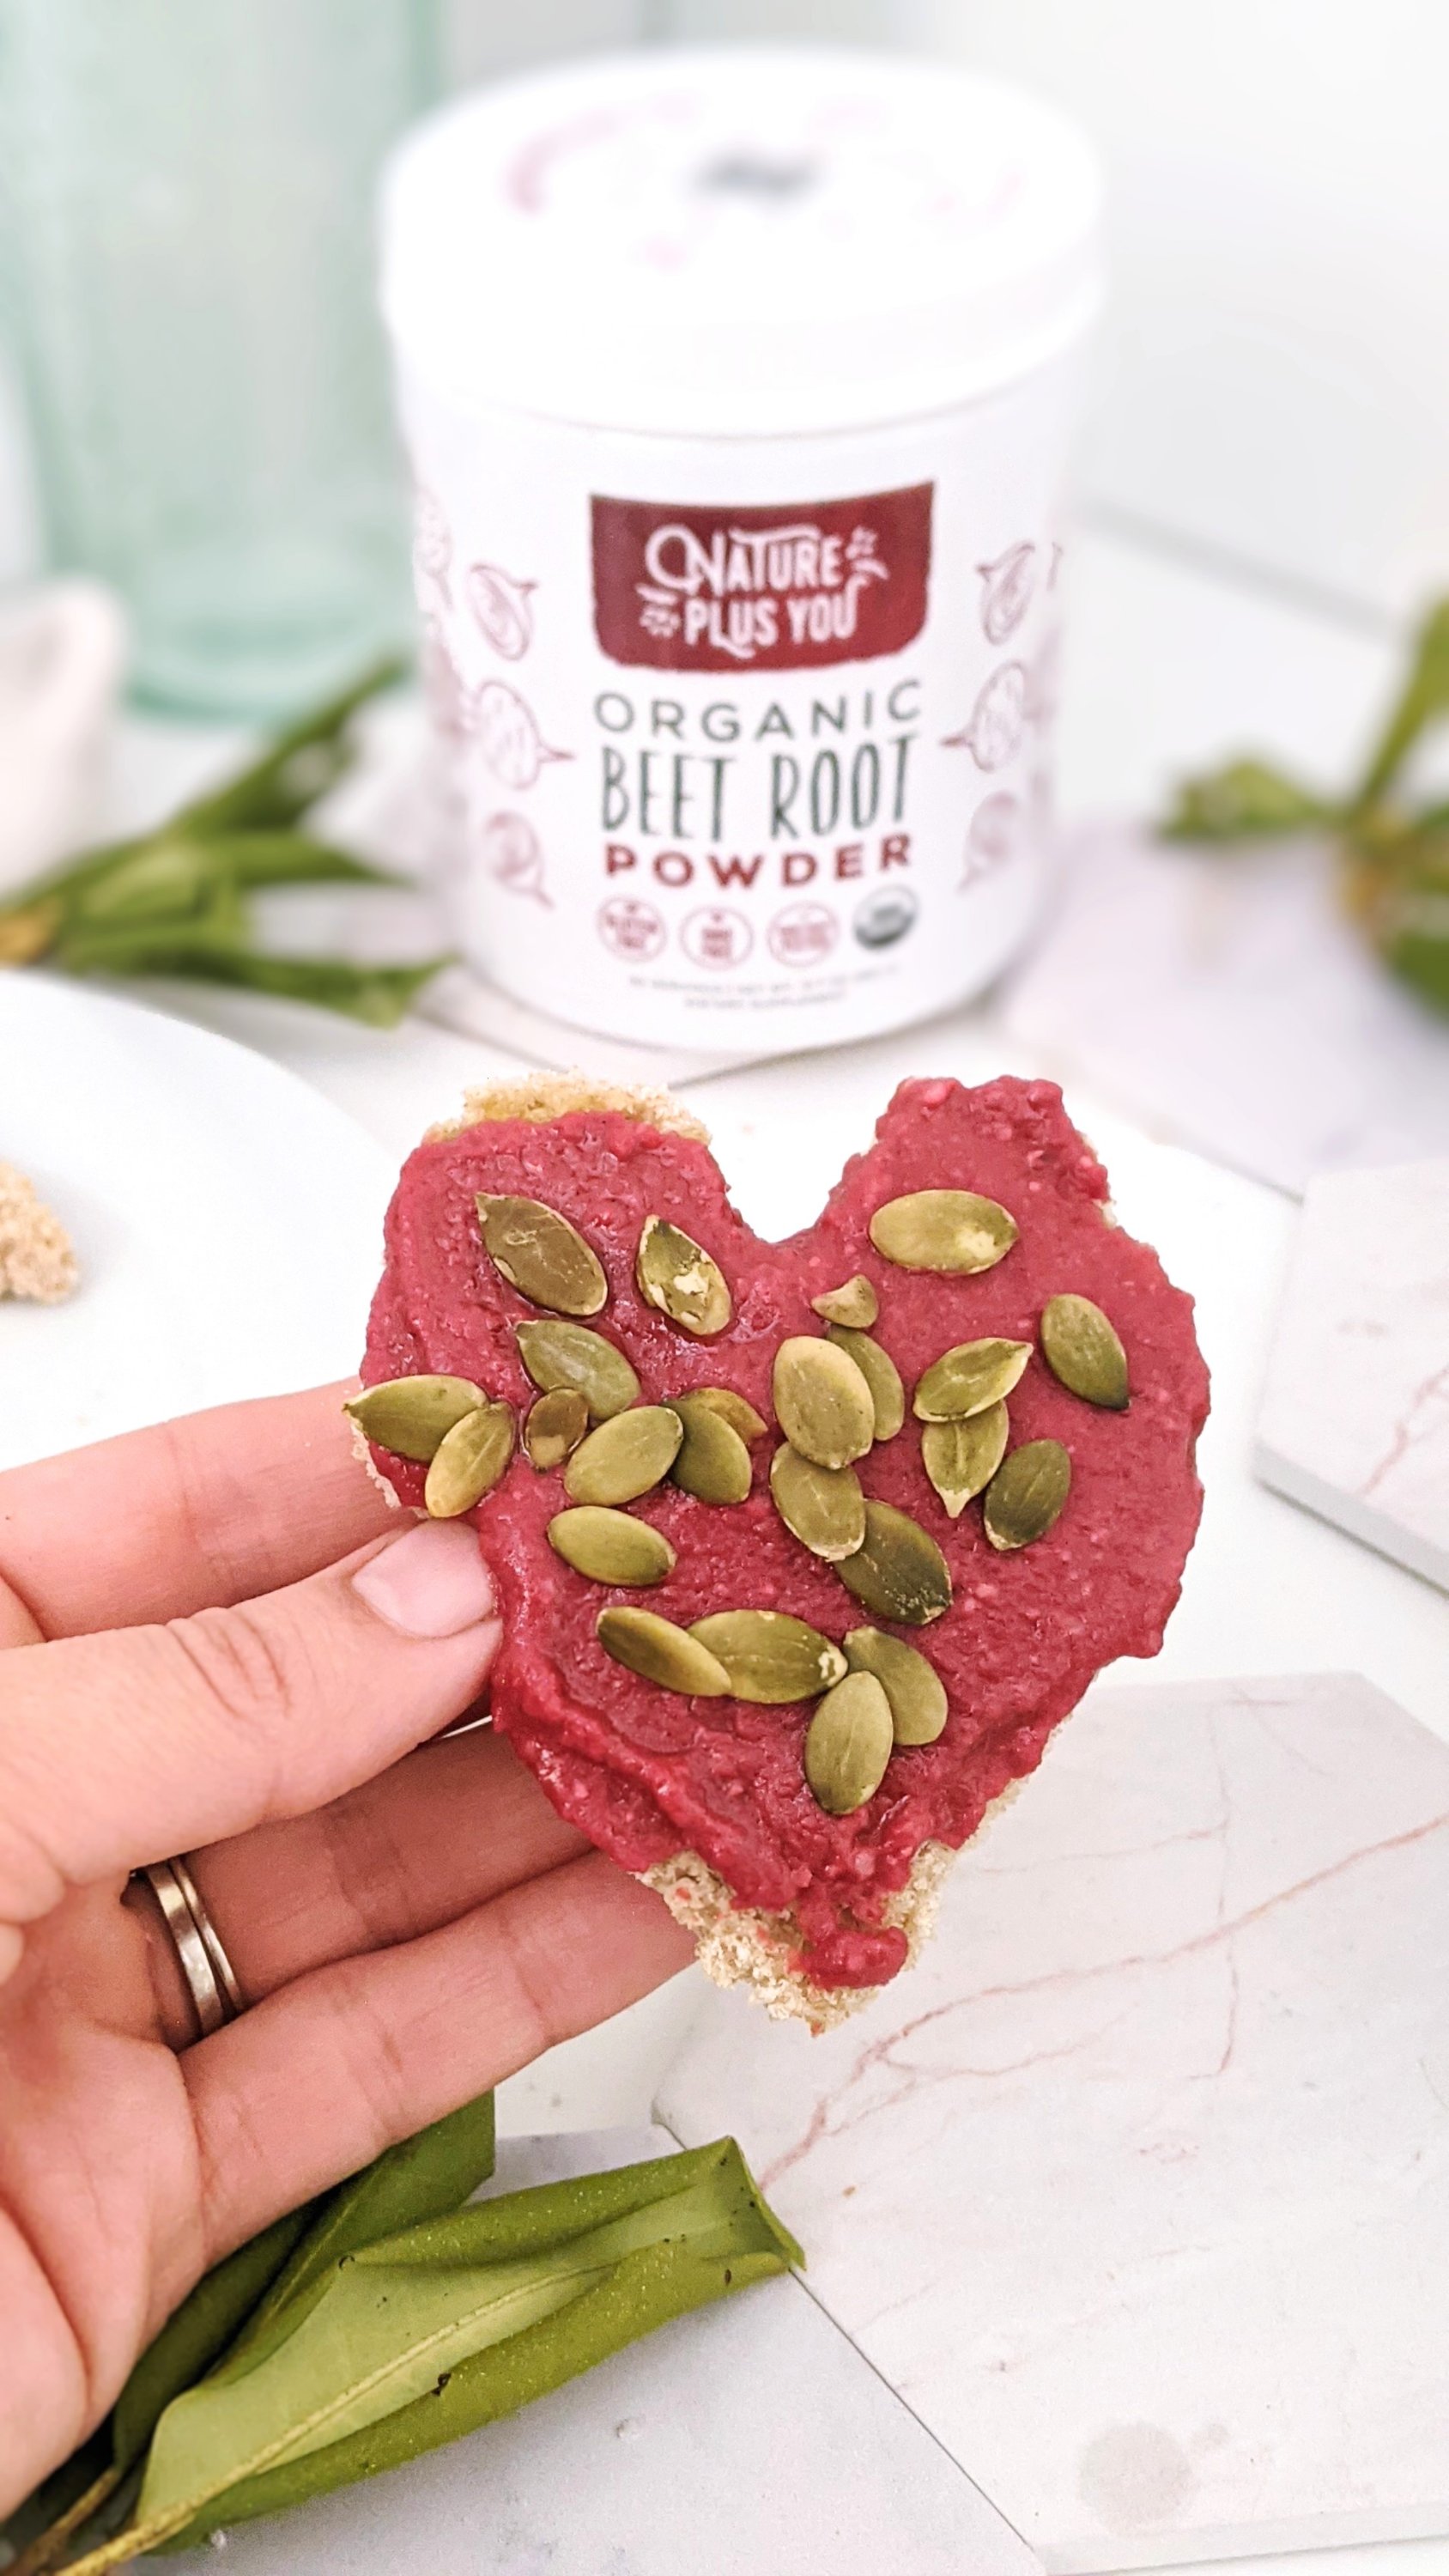 beet powder hummus with nature plus you beetroot powder healthy beet sppliment to use in recipes and beet powder ideas healthy vegan vegetarian beet hummus dip for valentines day recipe snacks